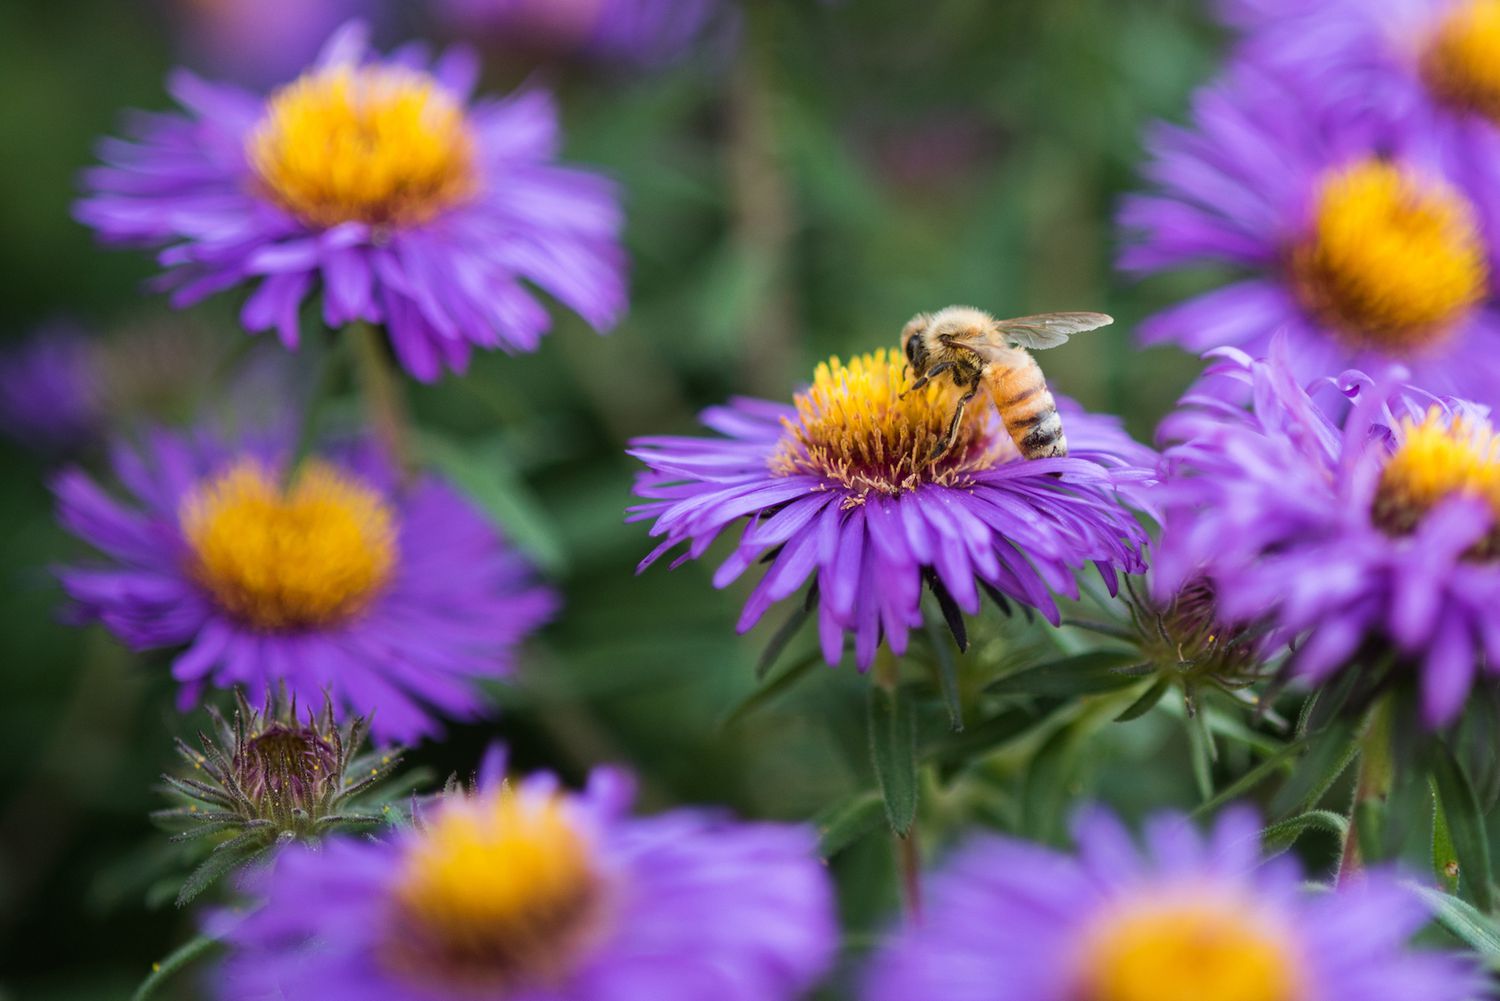 bee on purple aster in focus surrounded by blurrier images of similar flowers